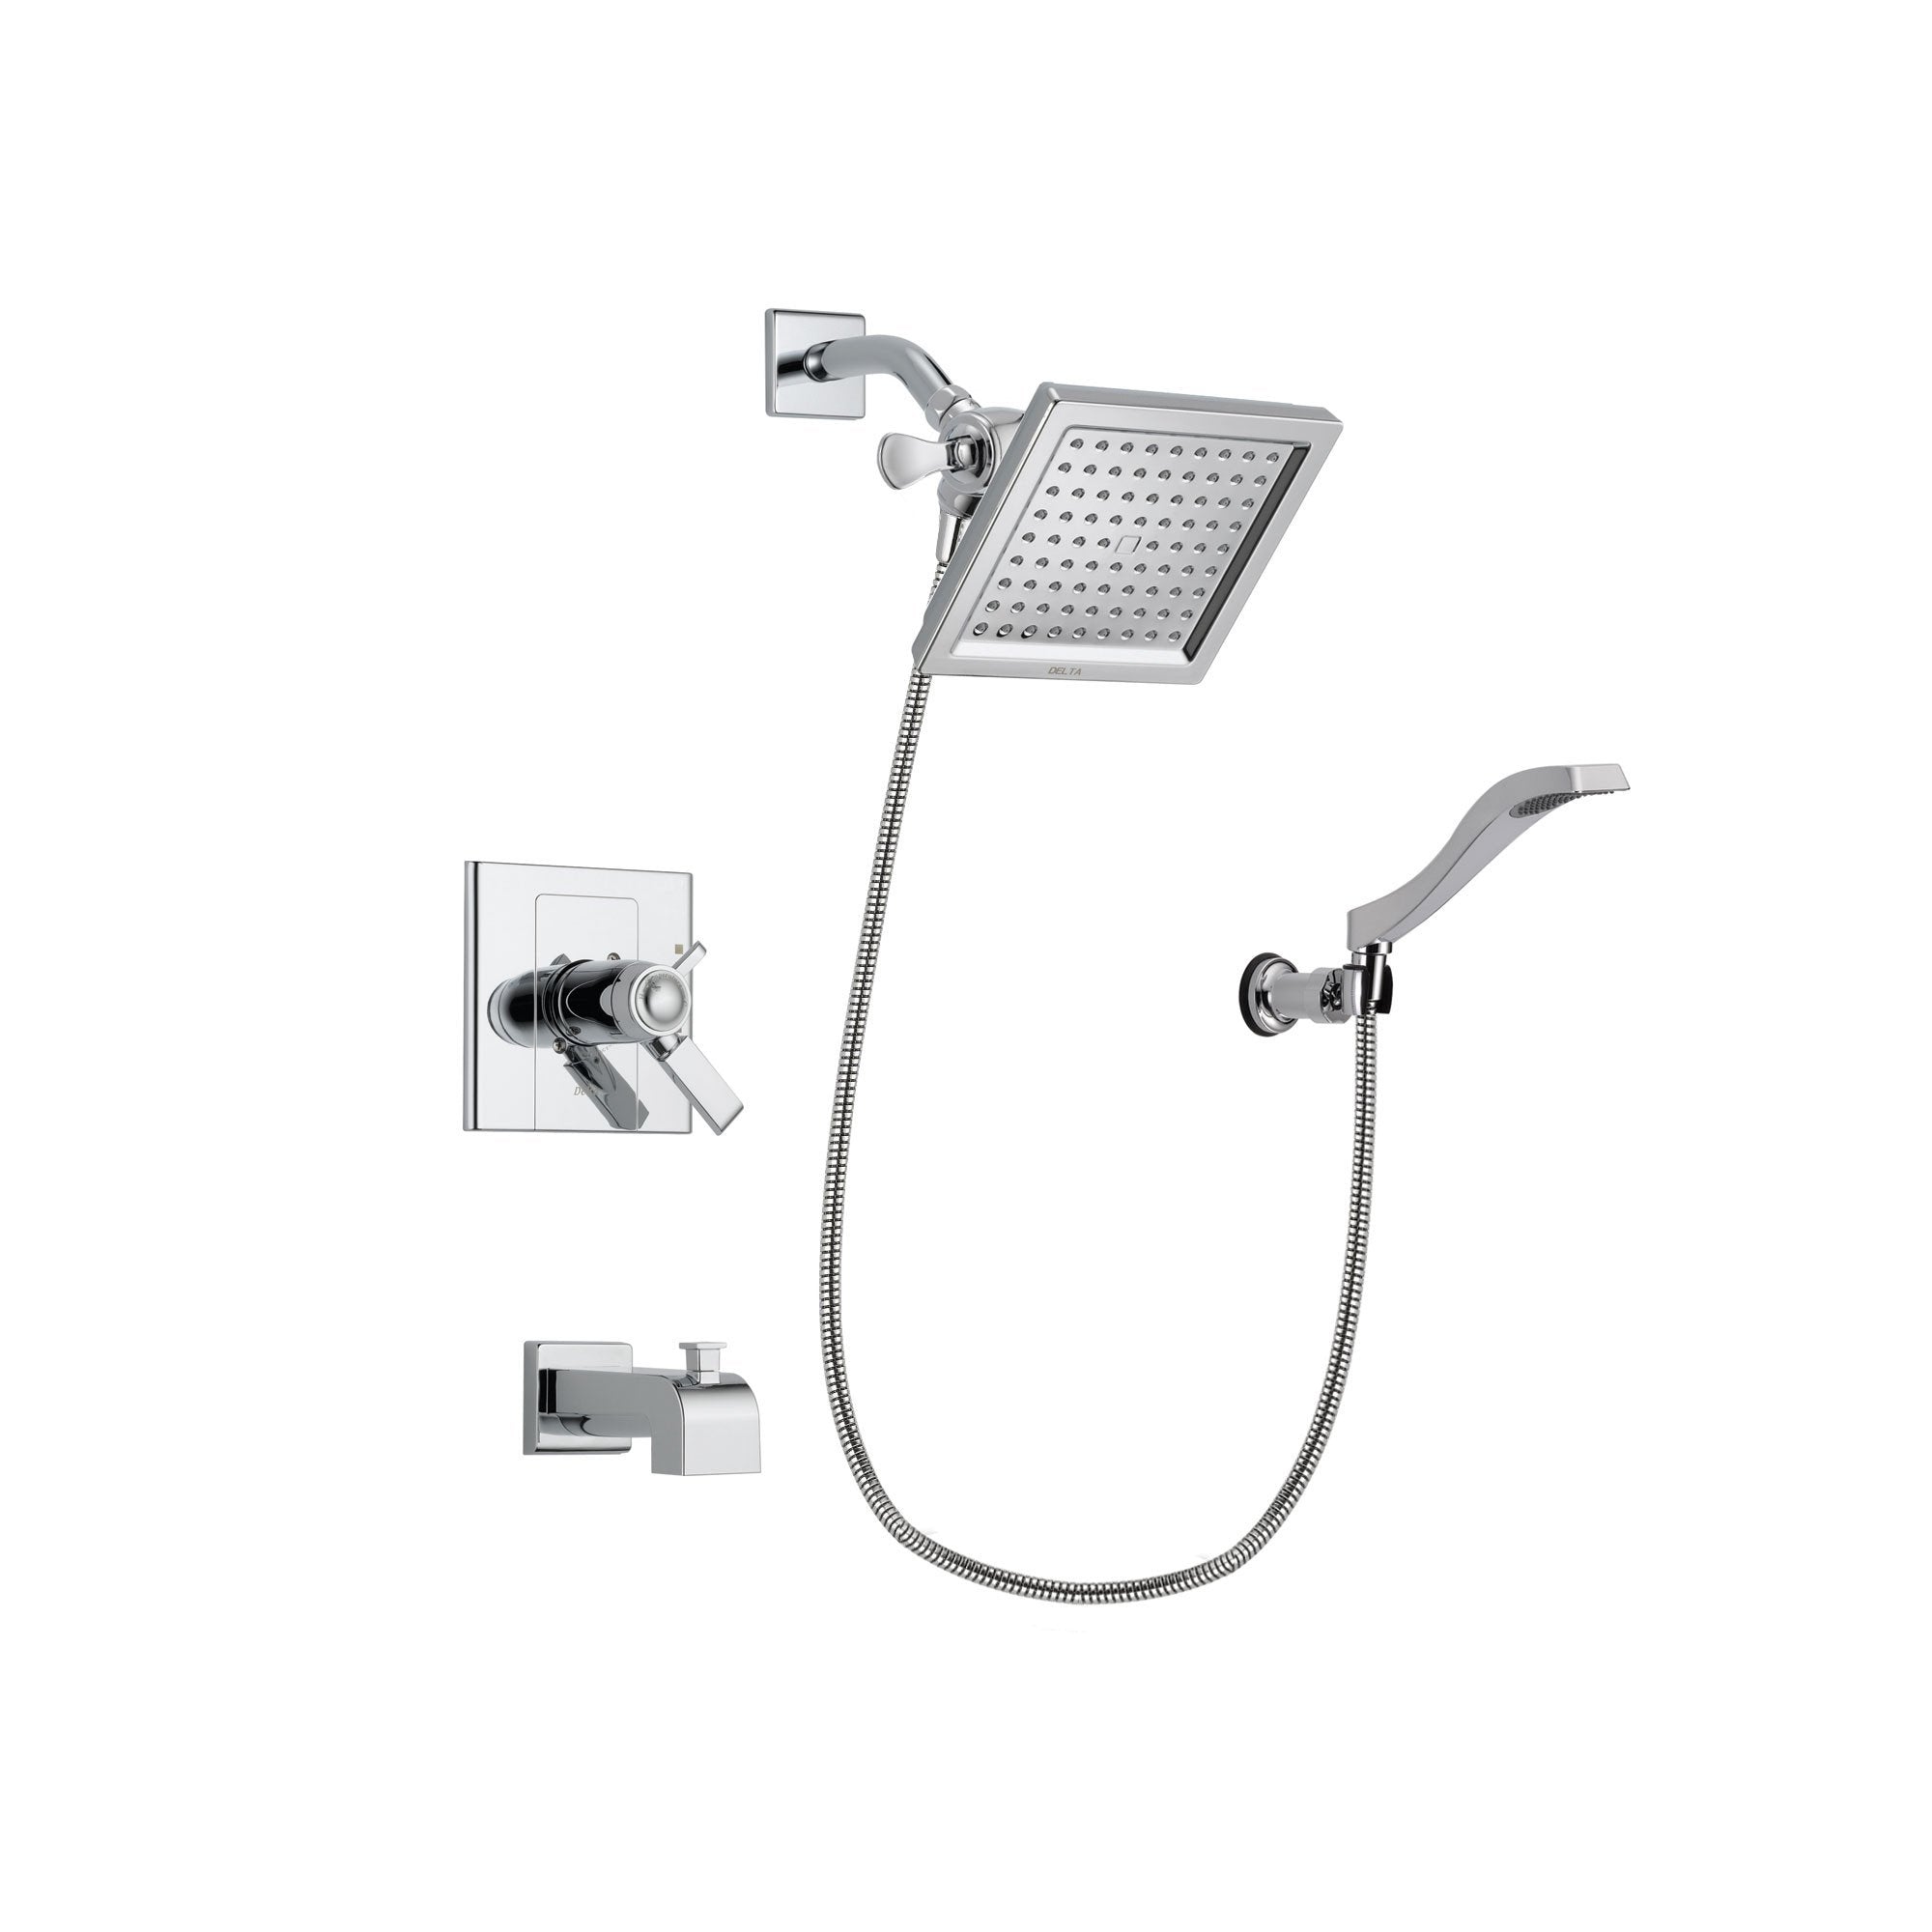 Delta Arzo Chrome Finish Thermostatic Tub and Shower Faucet System Package with 6.5-inch Square Rain Showerhead and Modern Handheld Shower Spray with Wall Bracket and Hose Includes Rough-in Valve and Tub Spout DSP0022V